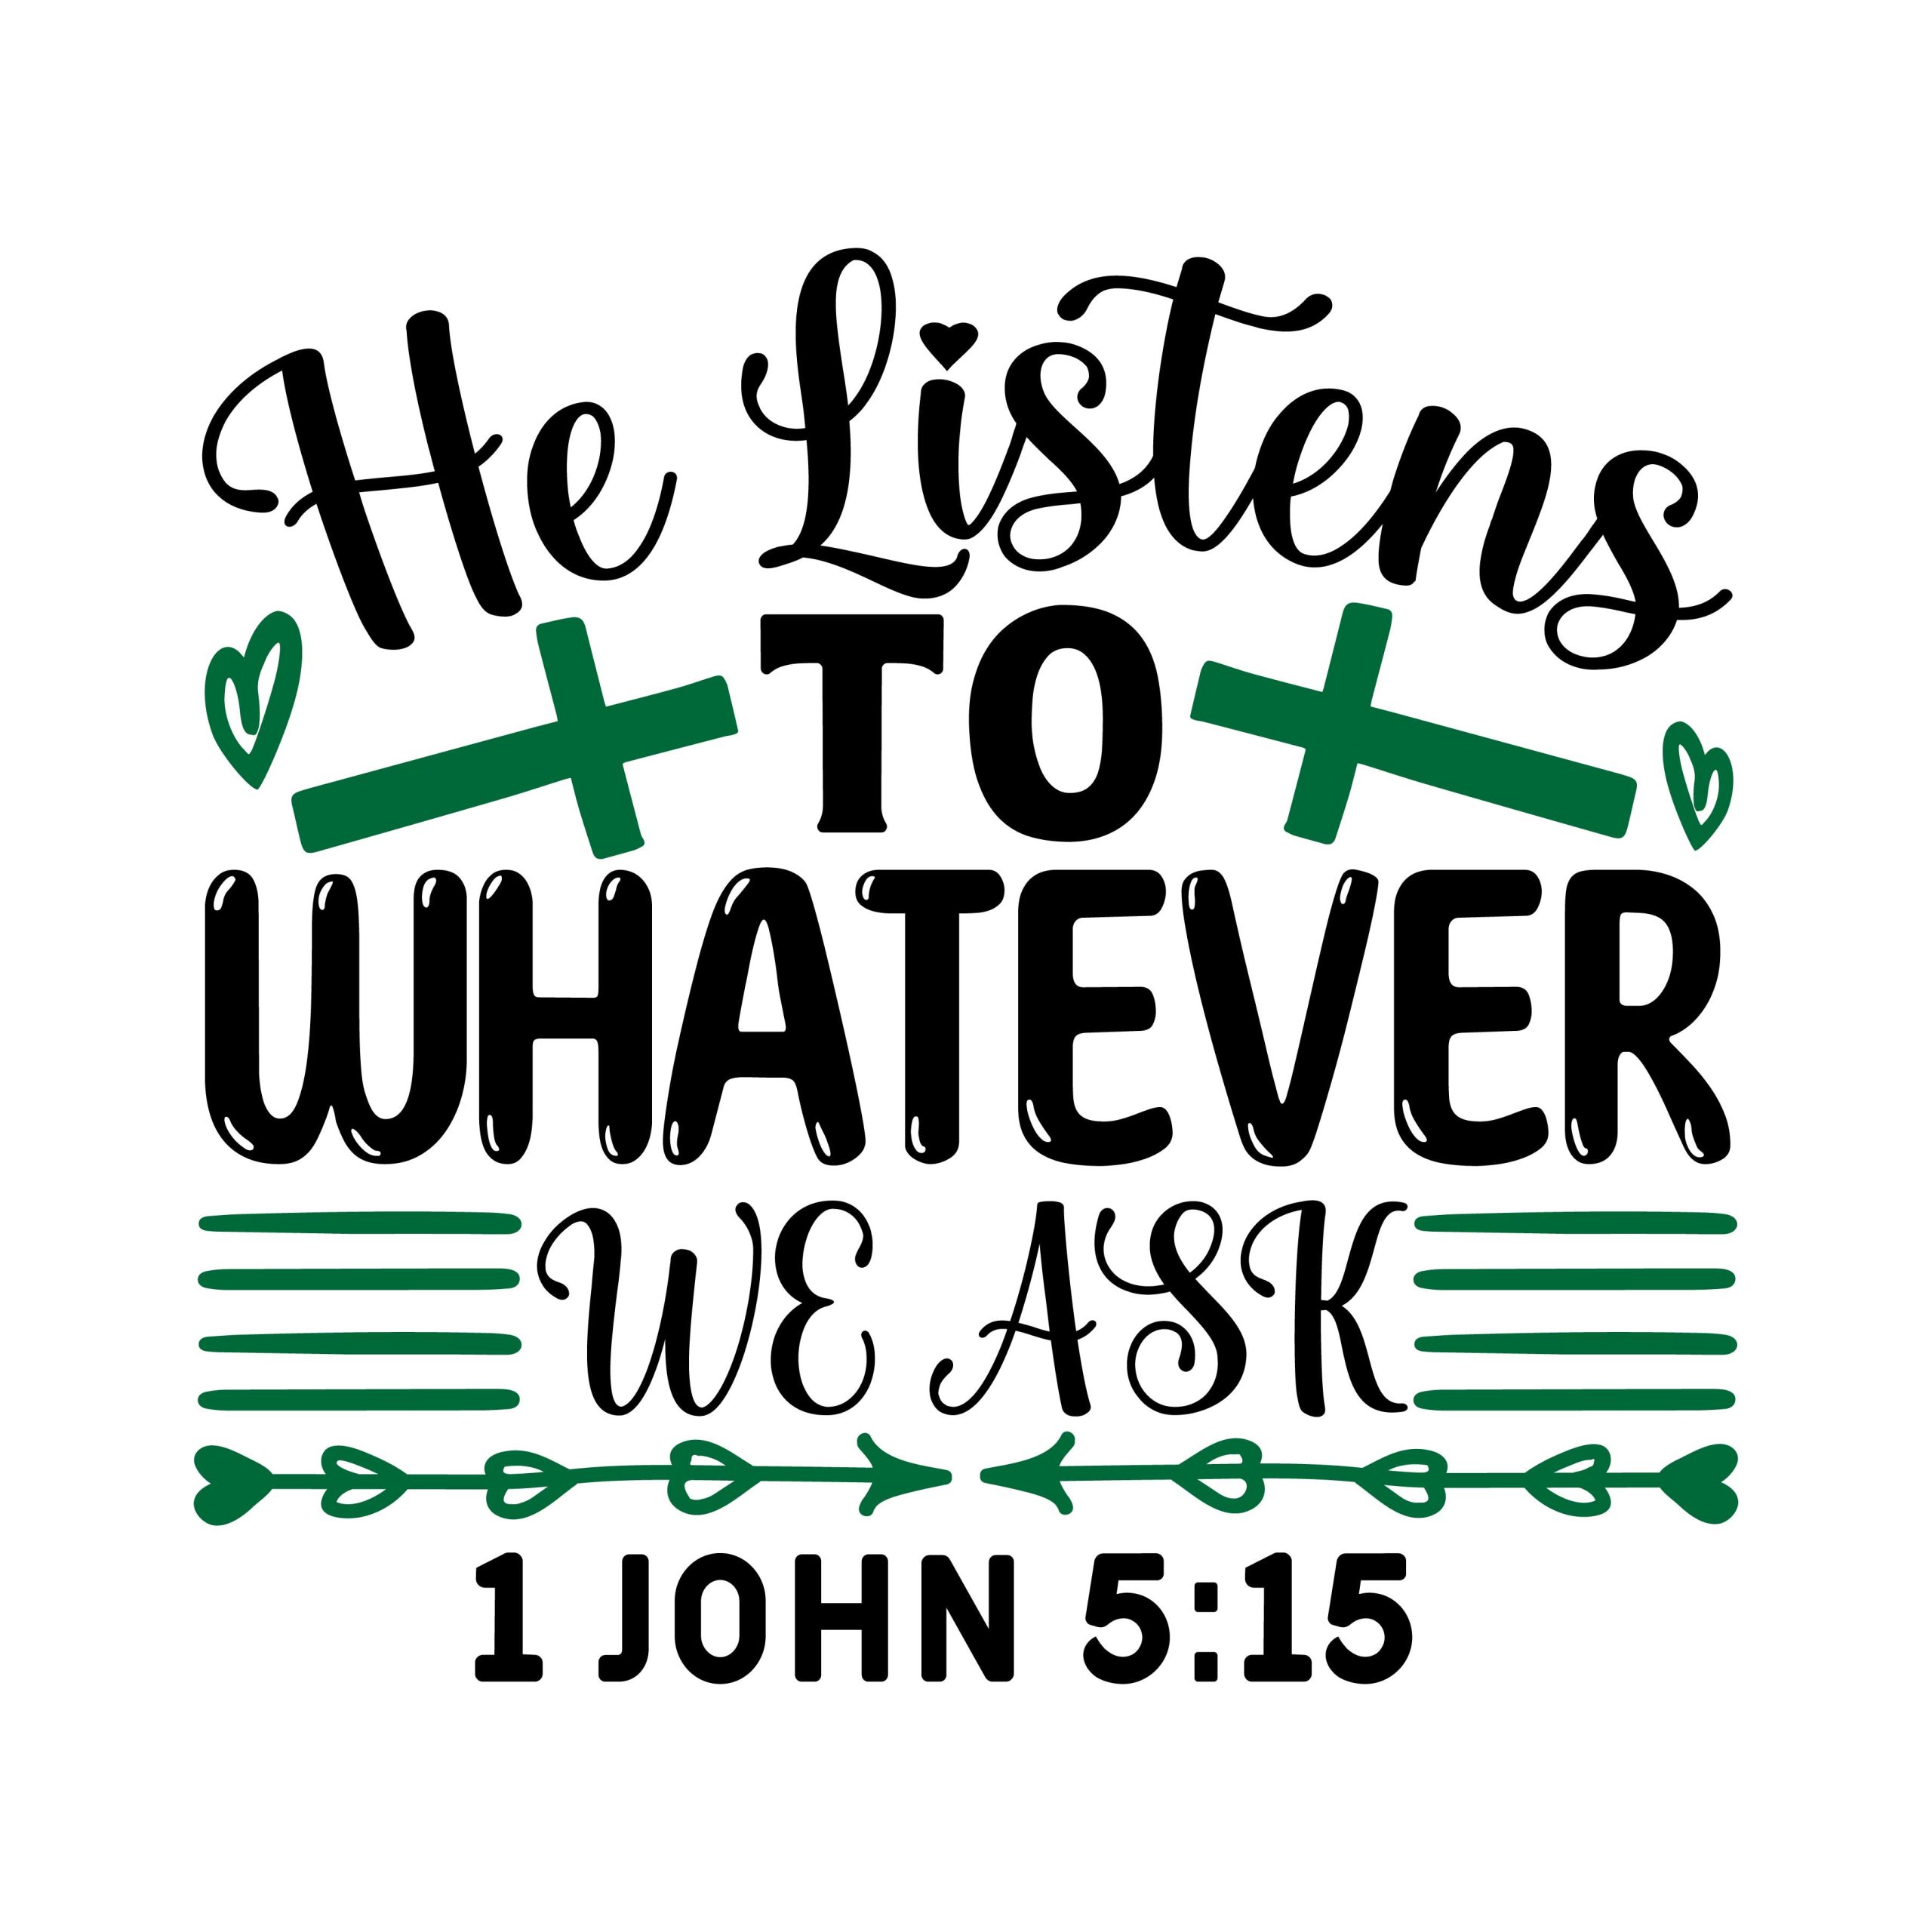 He listens to whatever we ask 1 john 5:15, bible verses, scripture verses, svg files, passages, sayings, cricut designs, silhouette, embroidery, bundle, free cut files, design space, vector